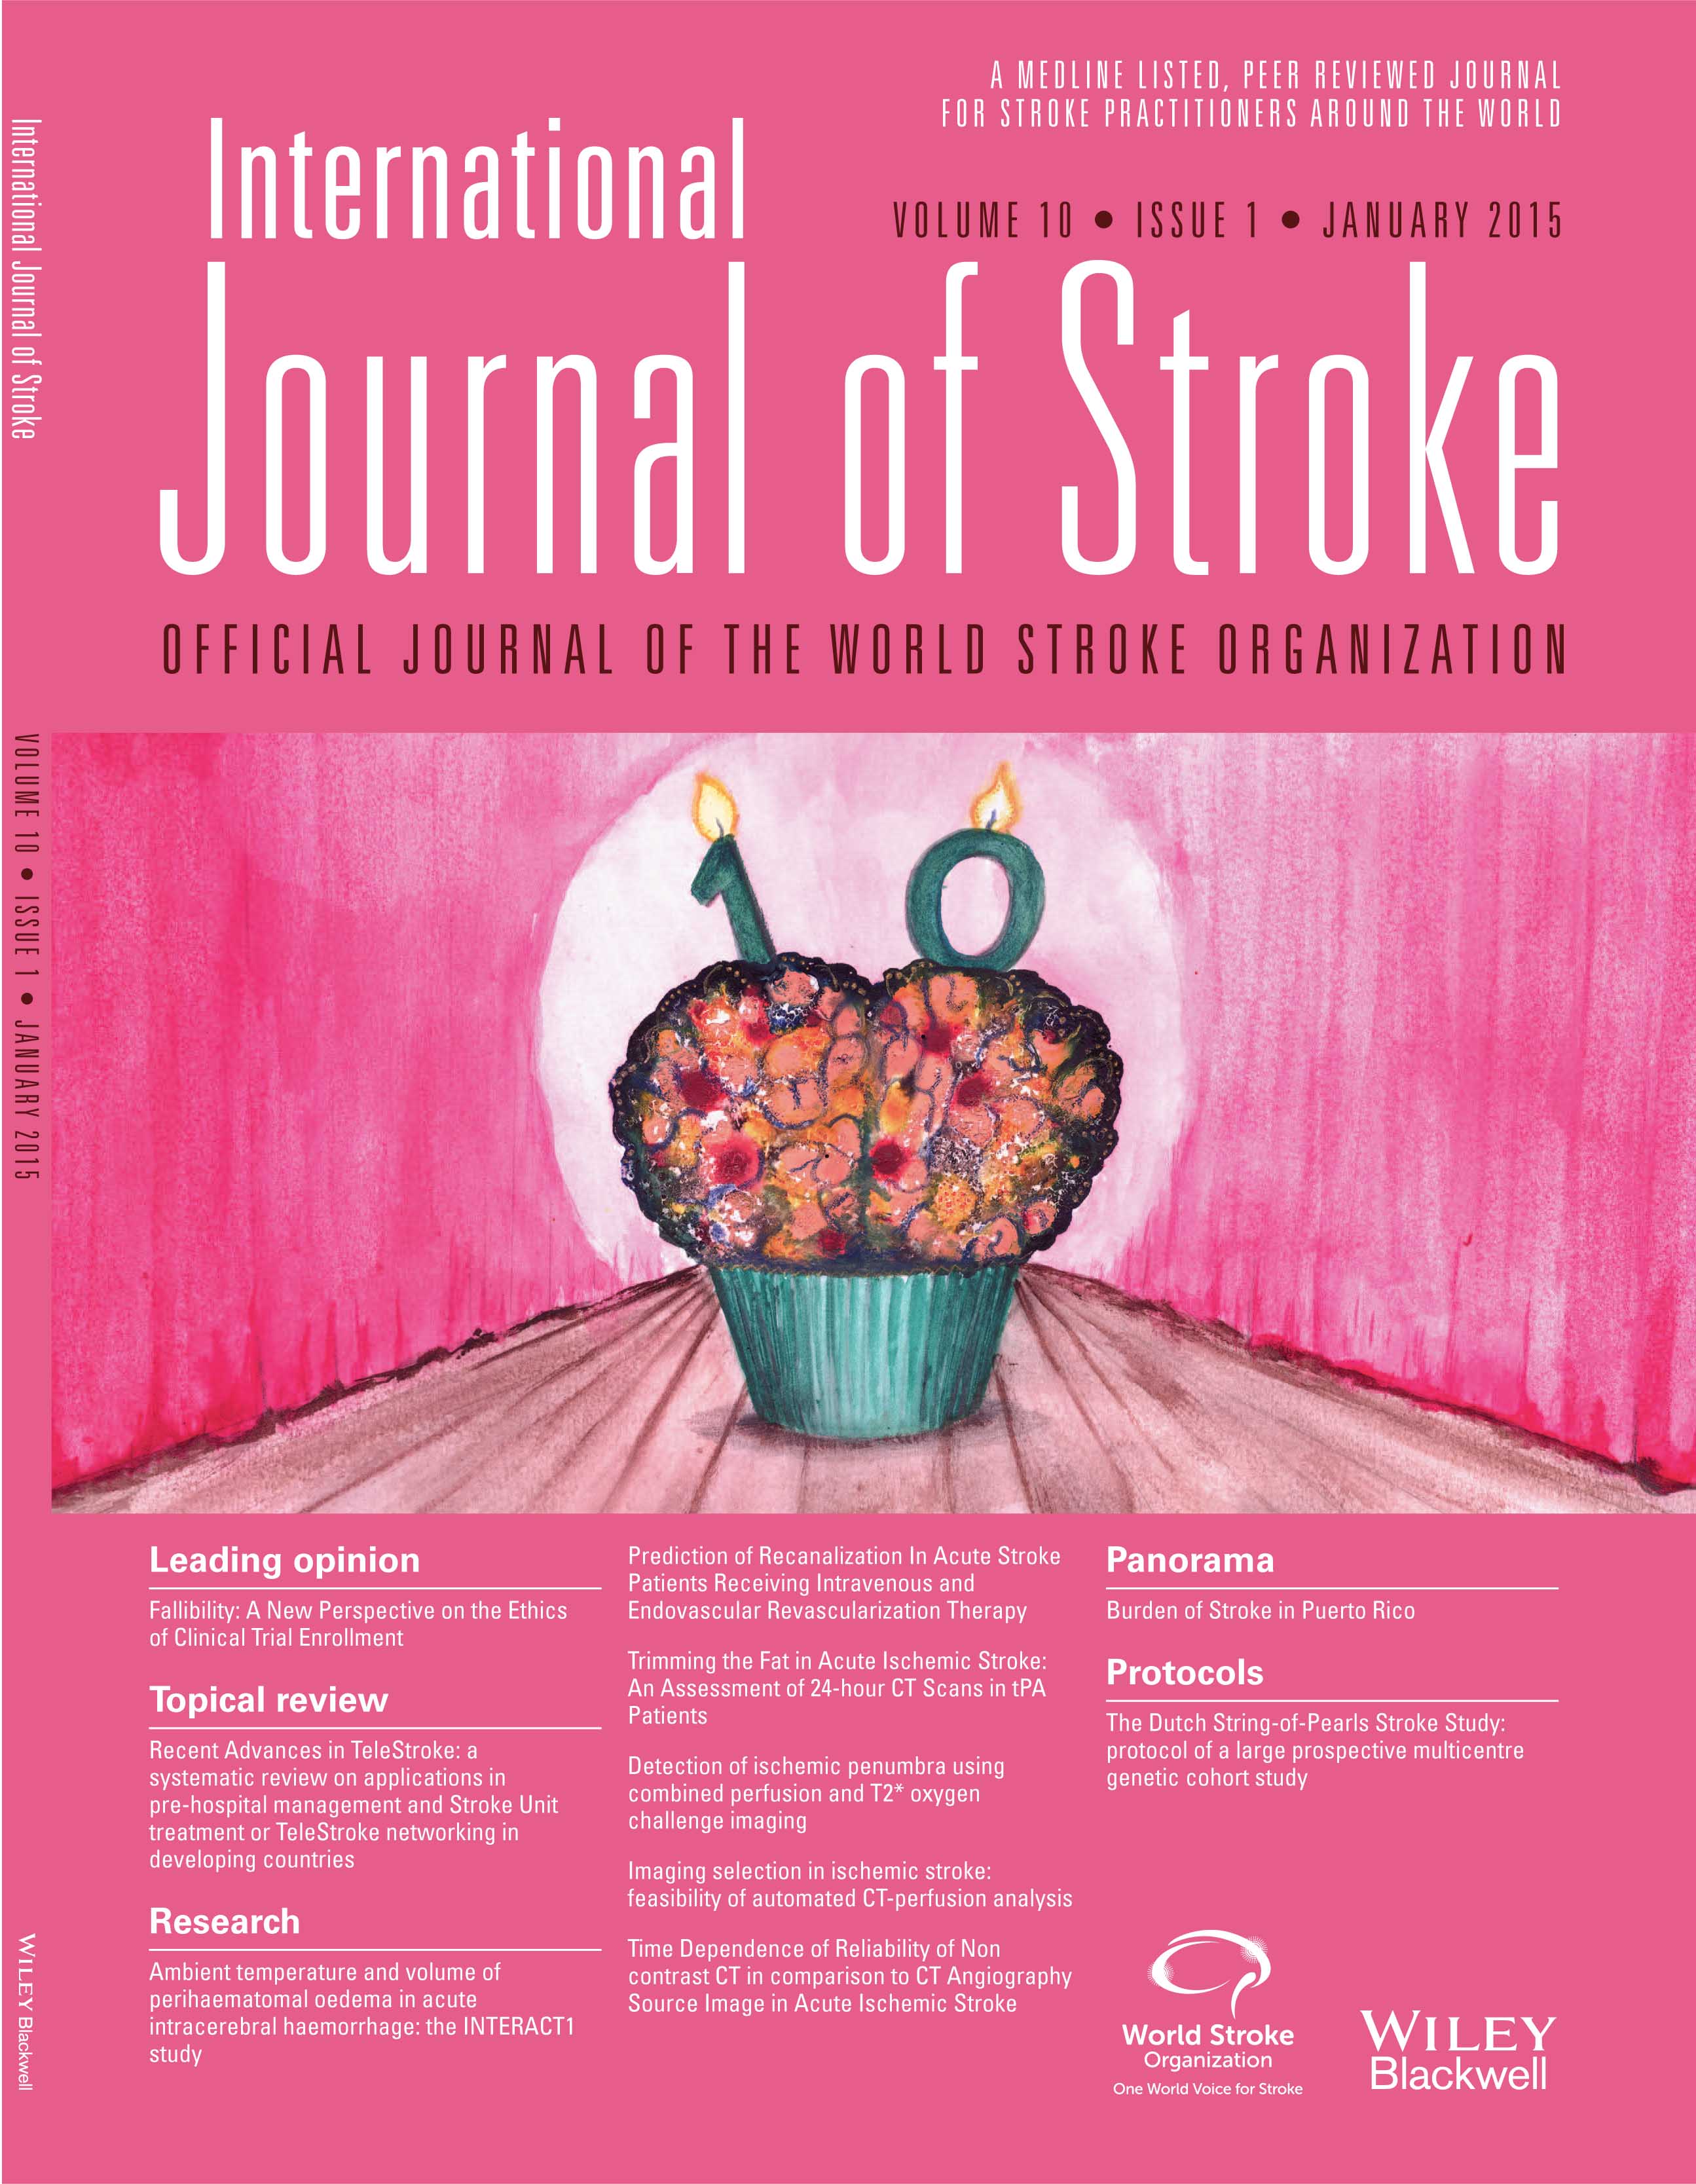 What’s New in Stroke? Phase III Randomized Clinical Trials of 2012-2014 - Robert Hart